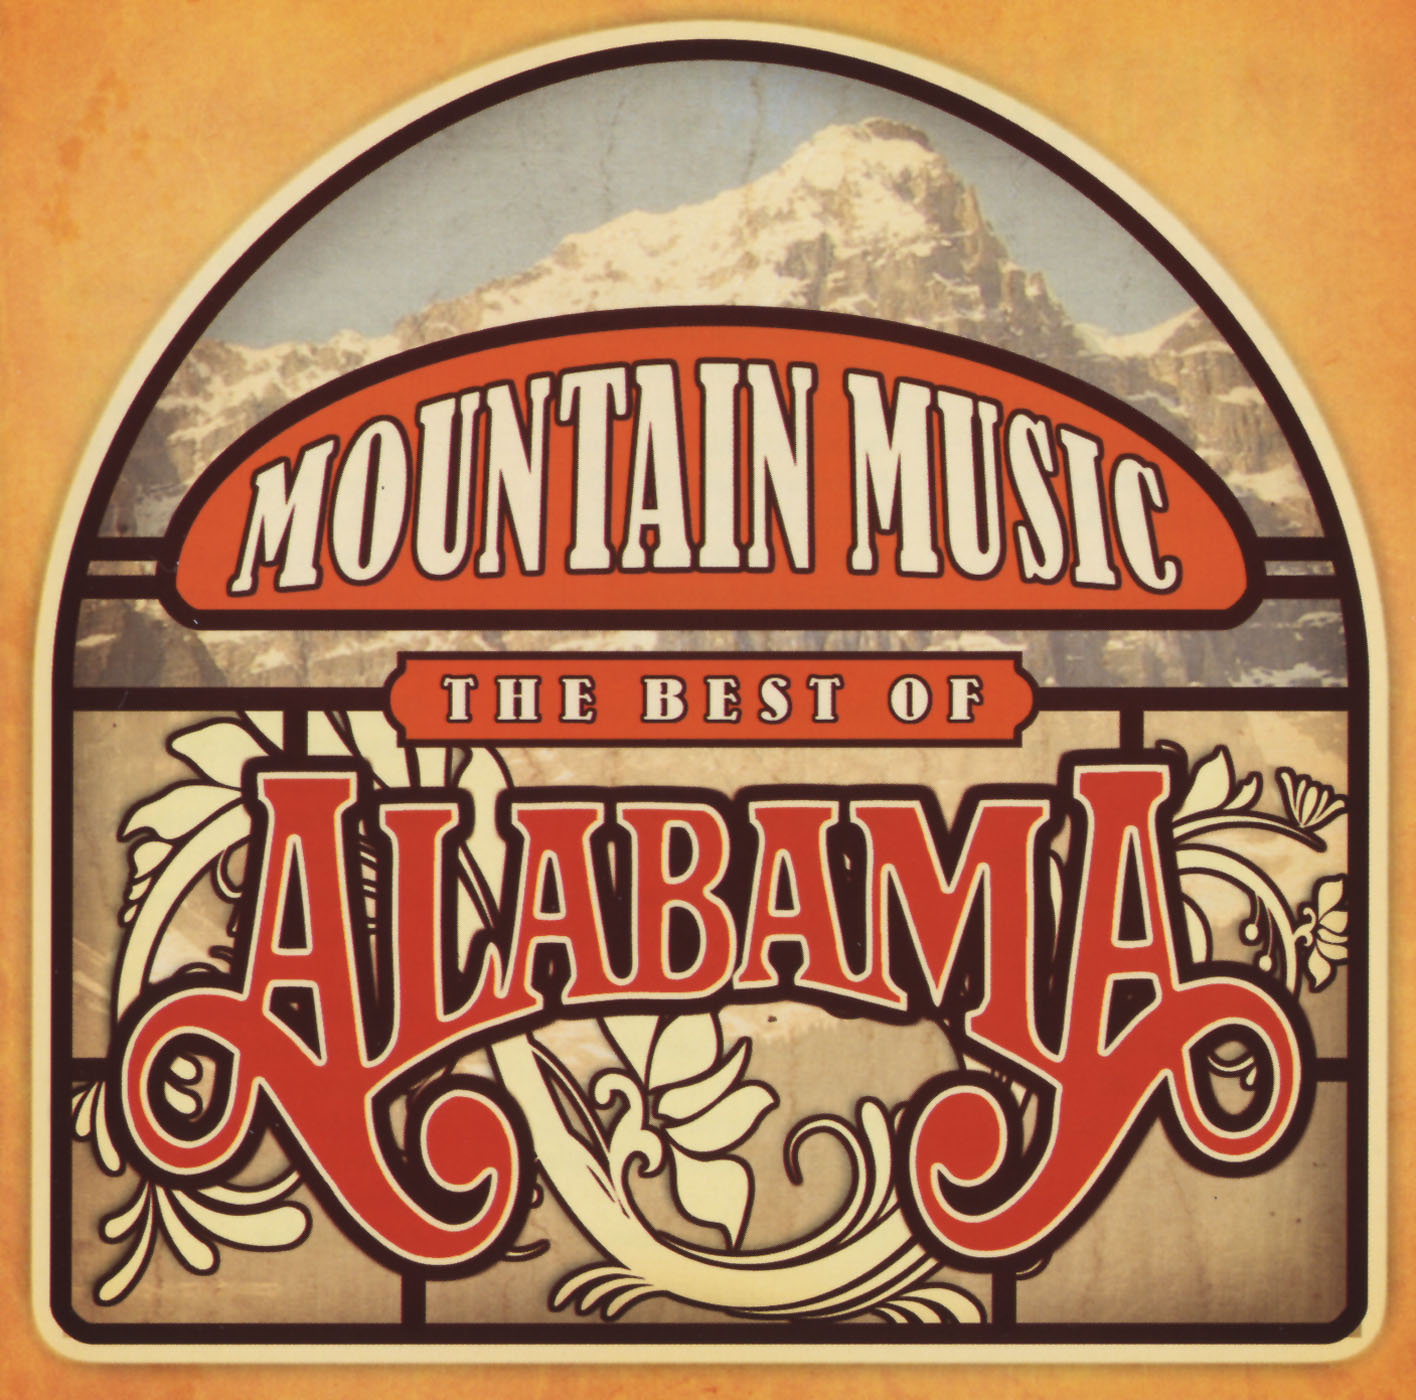 Mountain Music "The Best Of Alabama"